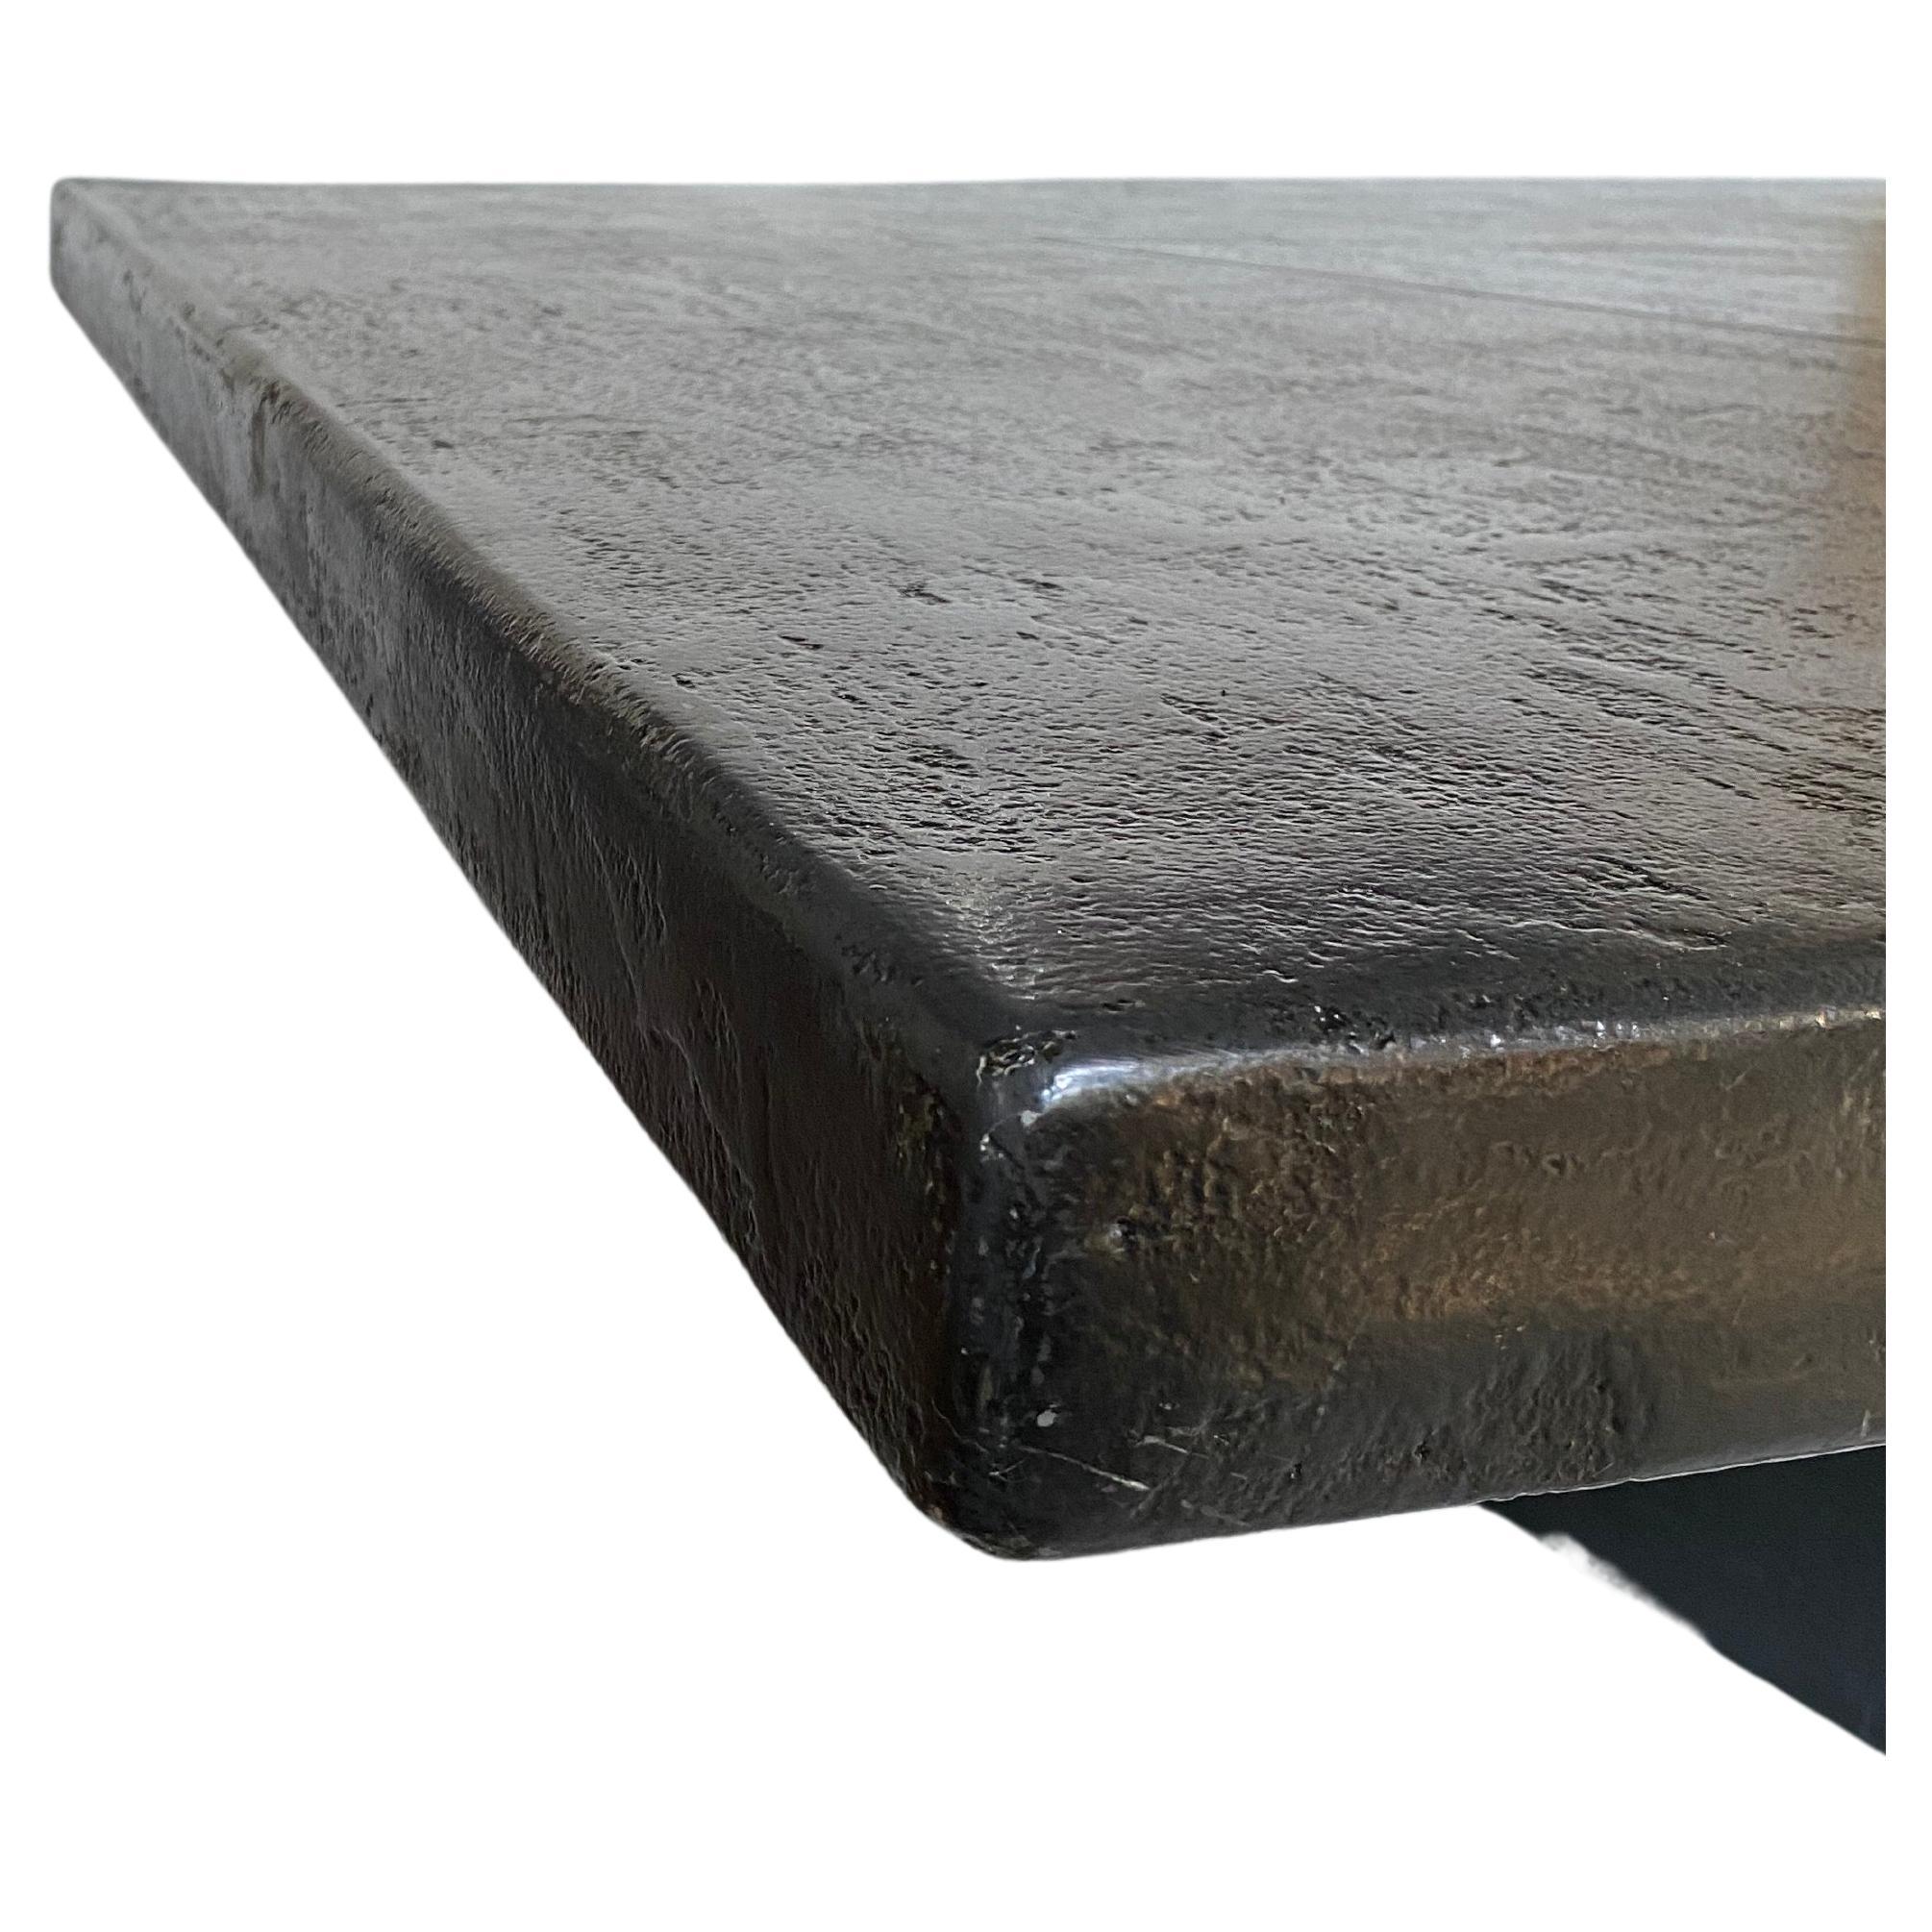 Sculptural Post-Modern Cantilever Geometric Coffee Table Black Plaster 1980s For Sale 11